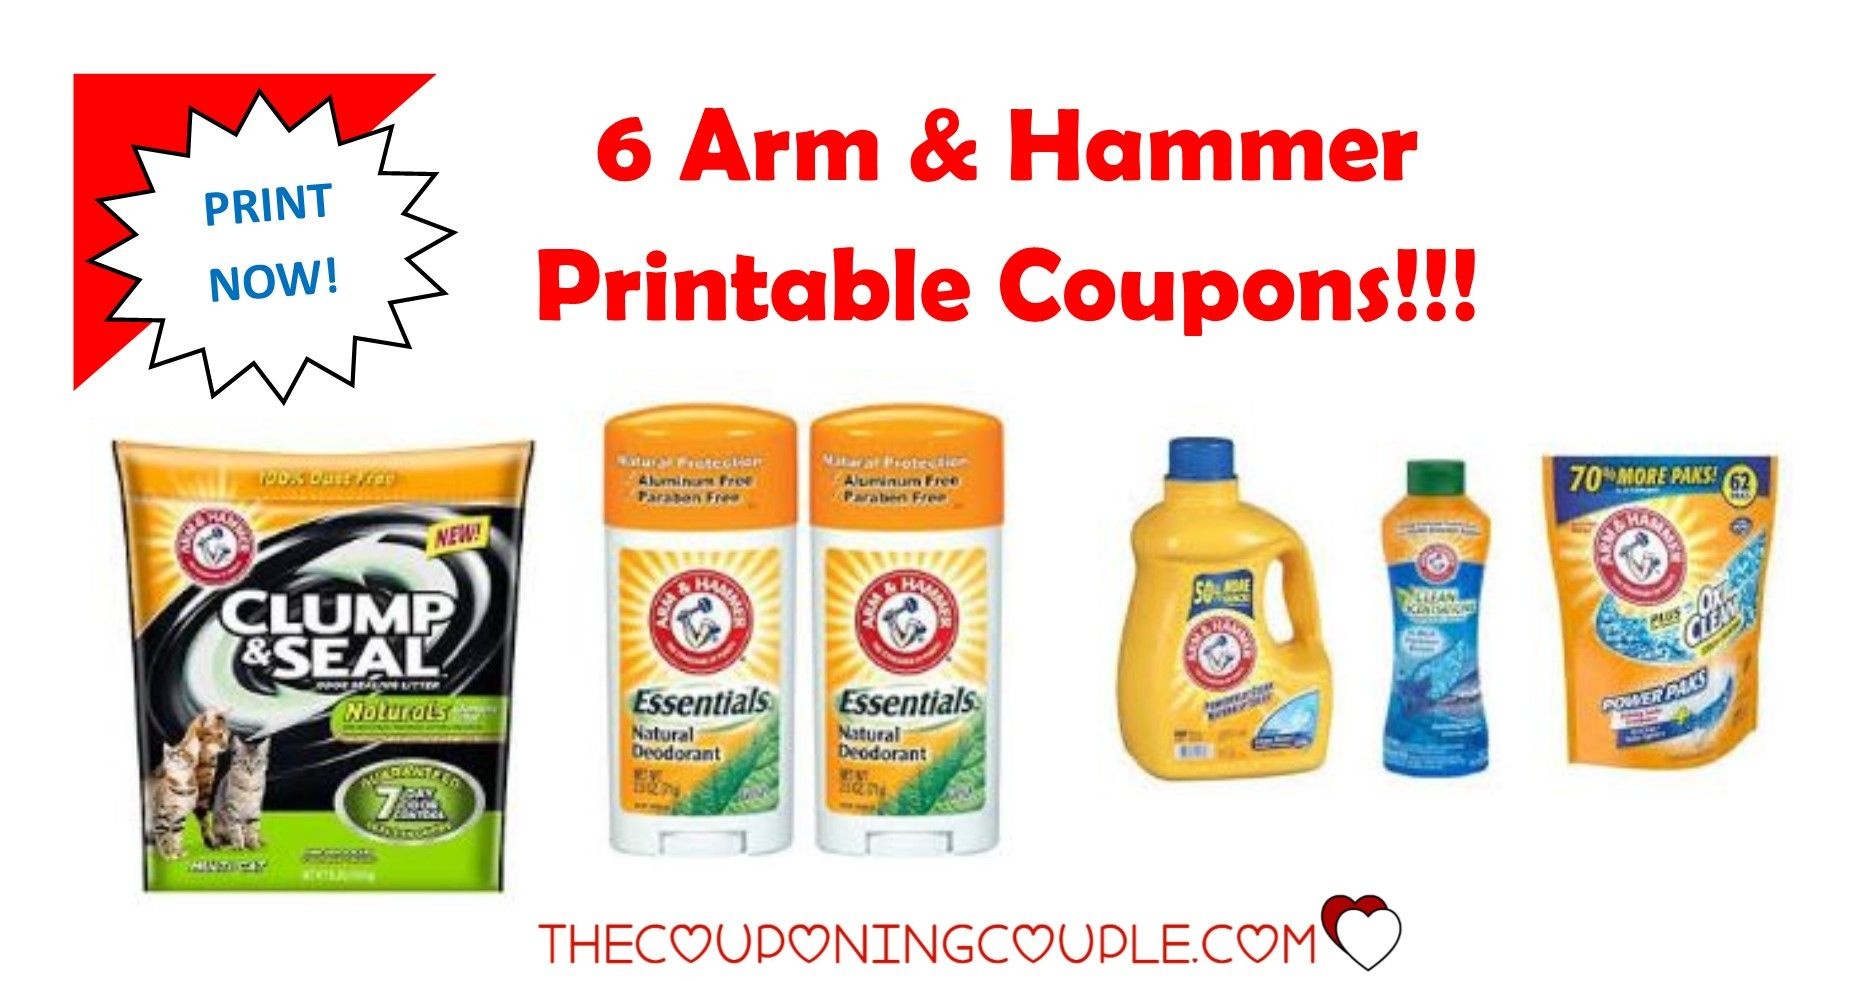 3 Arm &amp;amp; Hammer Printable Coupons ~ Print Now!! - Free Printable Arm And Hammer Coupons